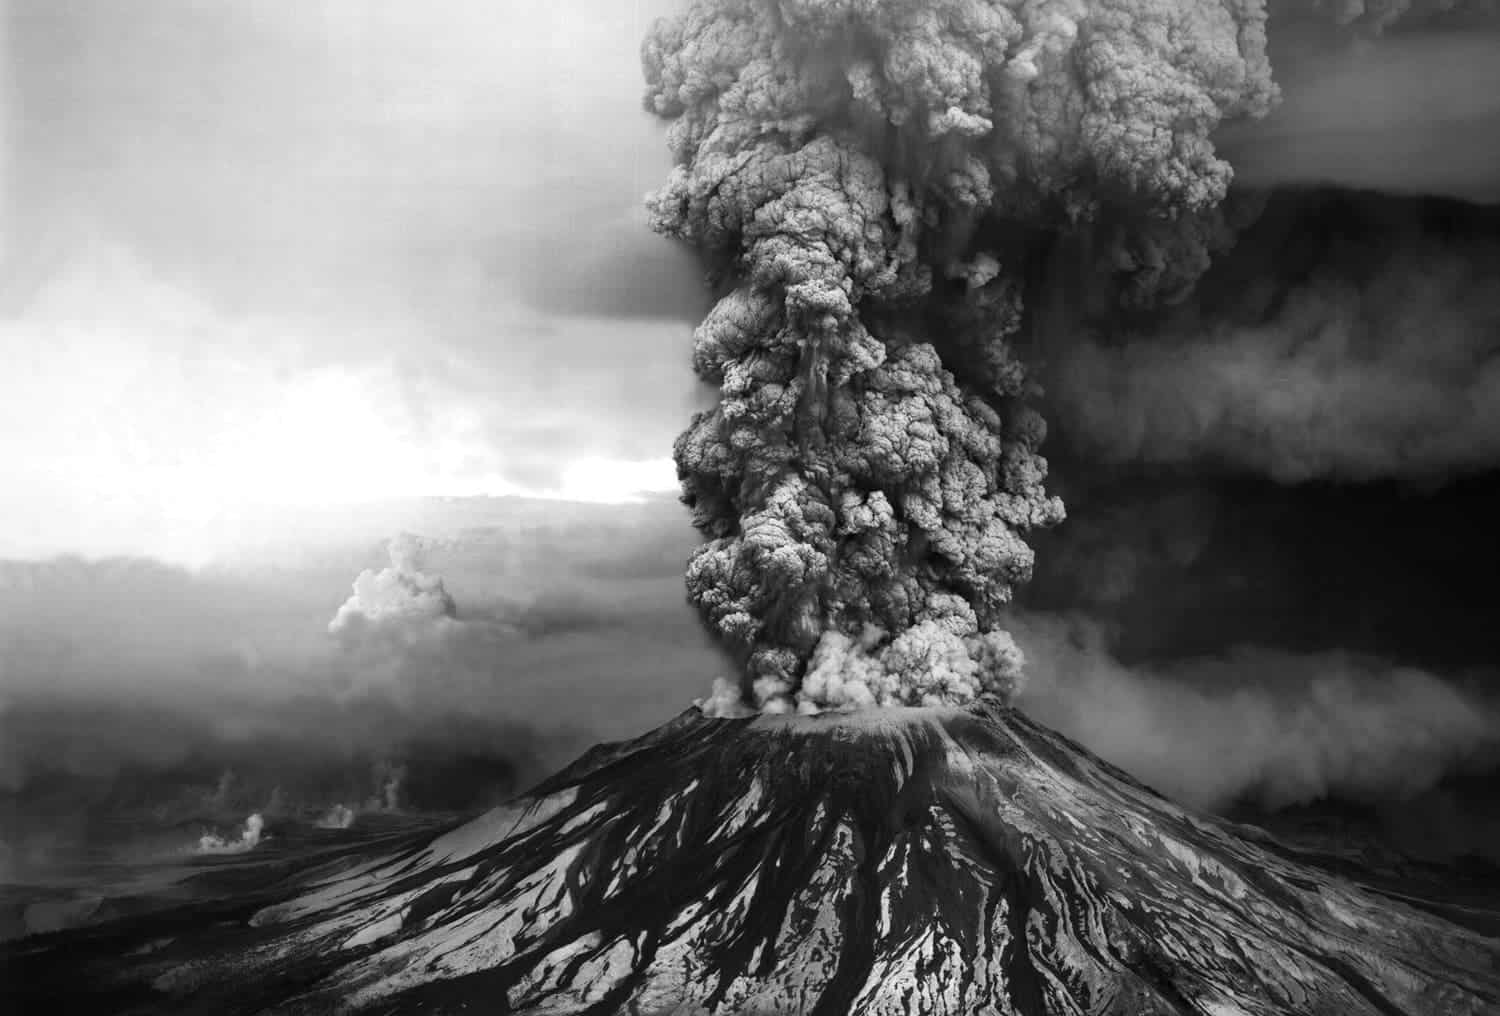 An ash plume billows from the crater atop Mount St. Helens hours after its eruption began on May 18th, 1980, in Washington state. Credit: USGS / Robert Krimmel